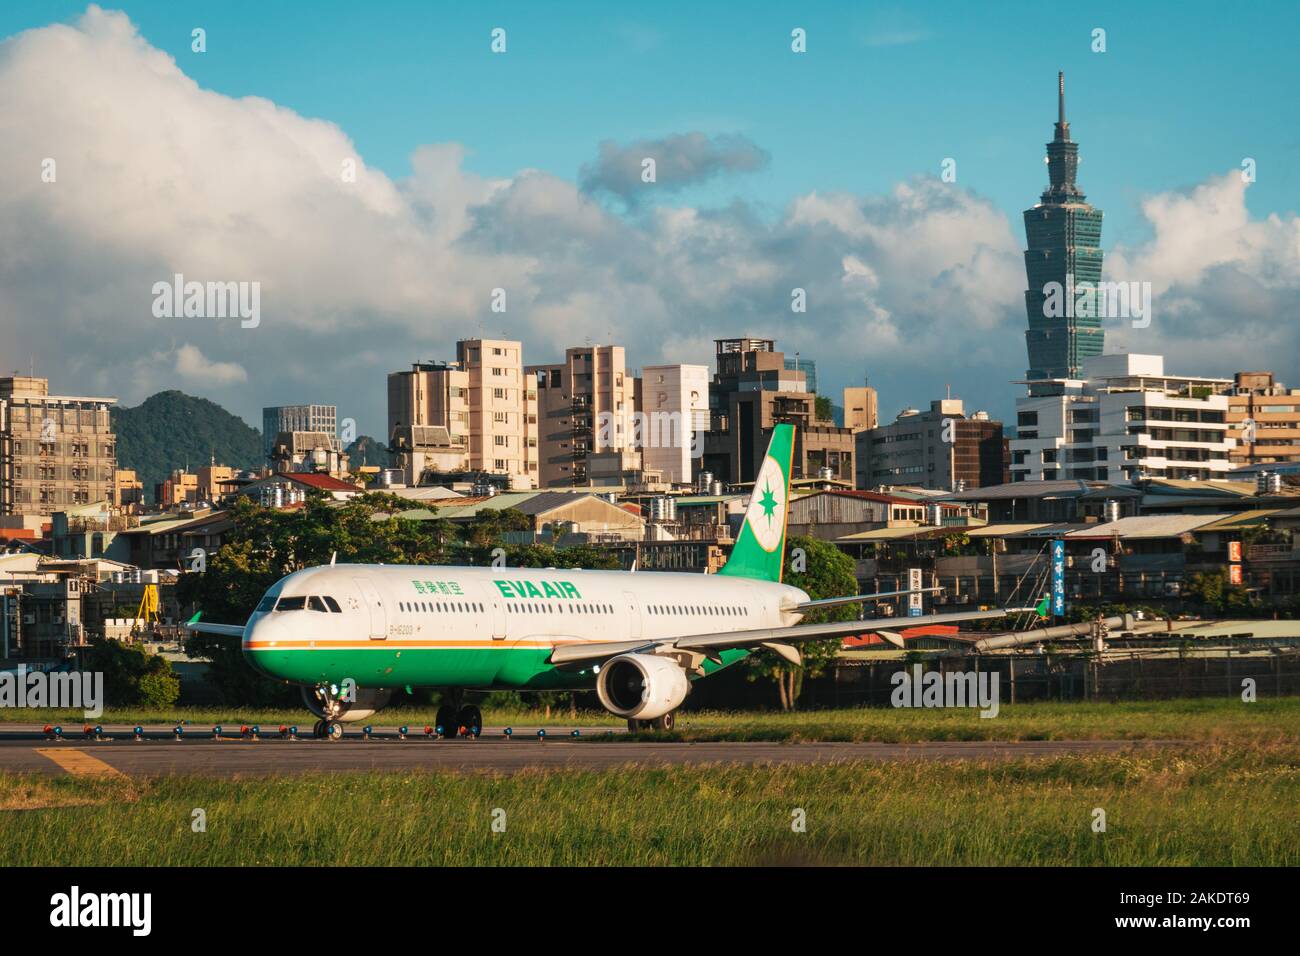 An EVA Air Airbus A321 lines up for takeoff on a sunny evening at Taipei's Songshan Airport. The Taipei 101 skyscraper is visible behind Stock Photo